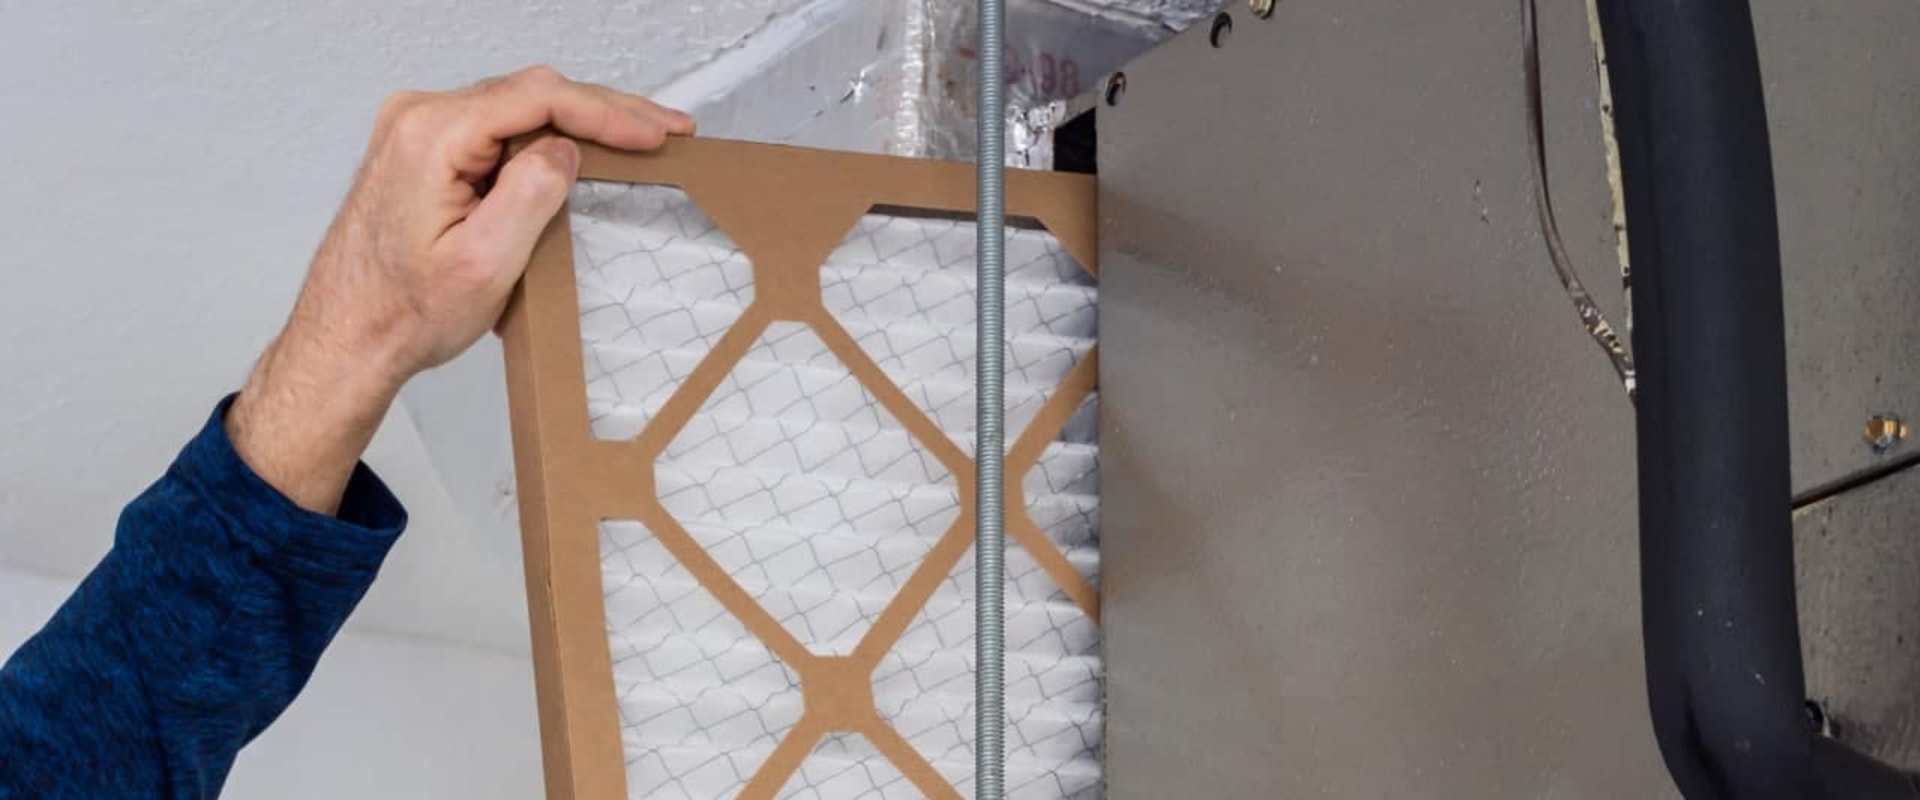 How Often Should You Replace a 20x20x4 Air Filter?